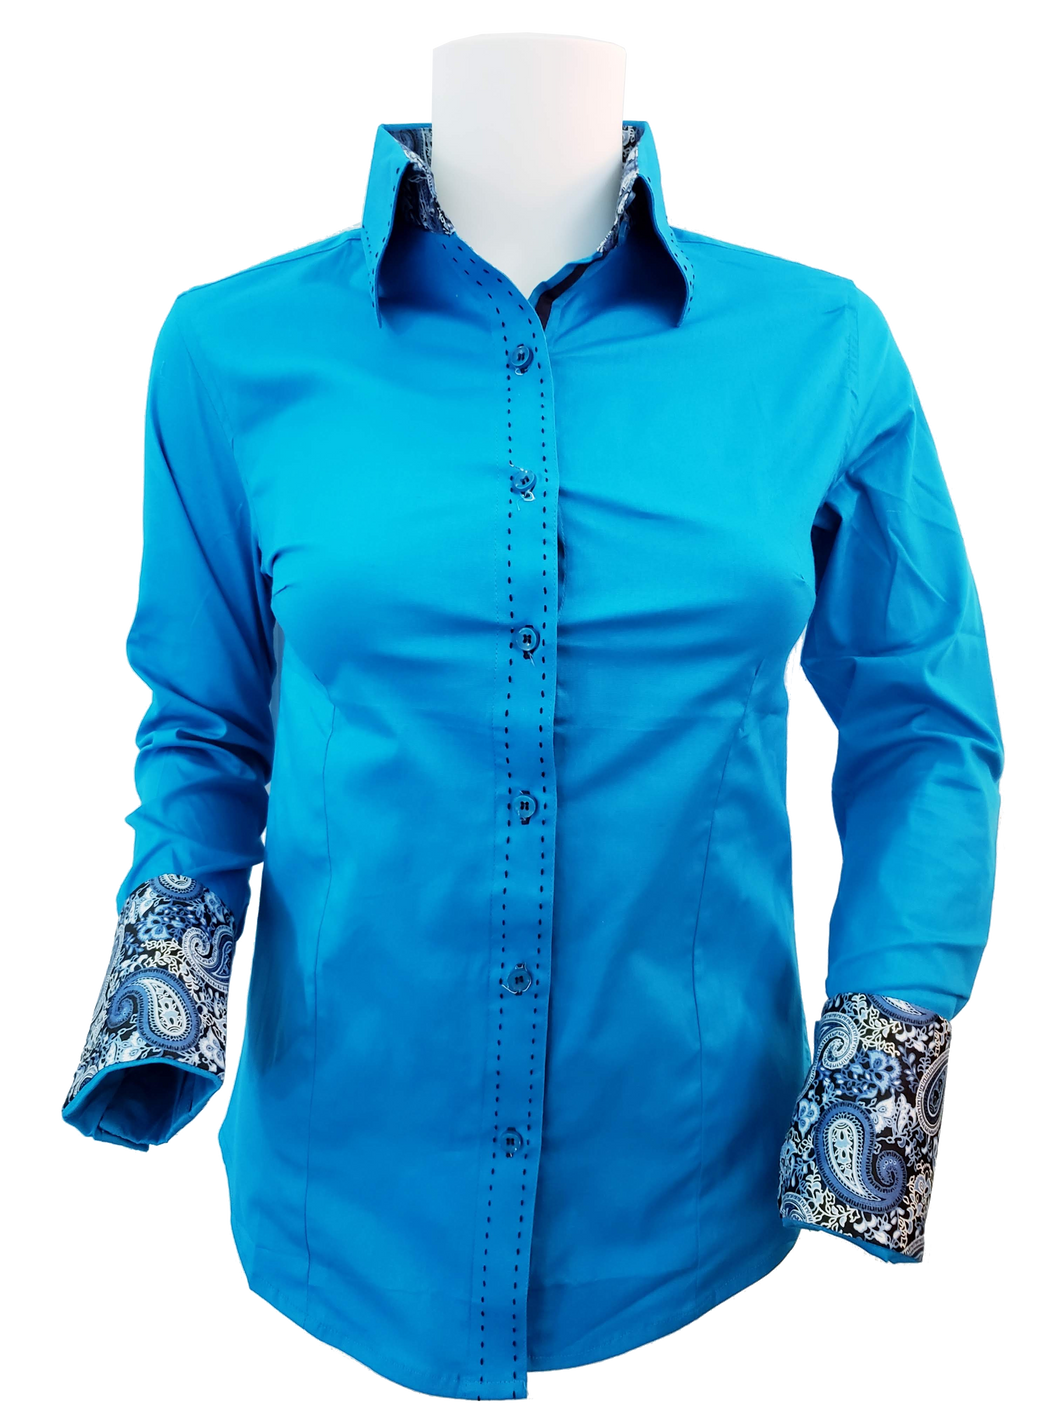 TURQUOISE CONTRAST SHIRT